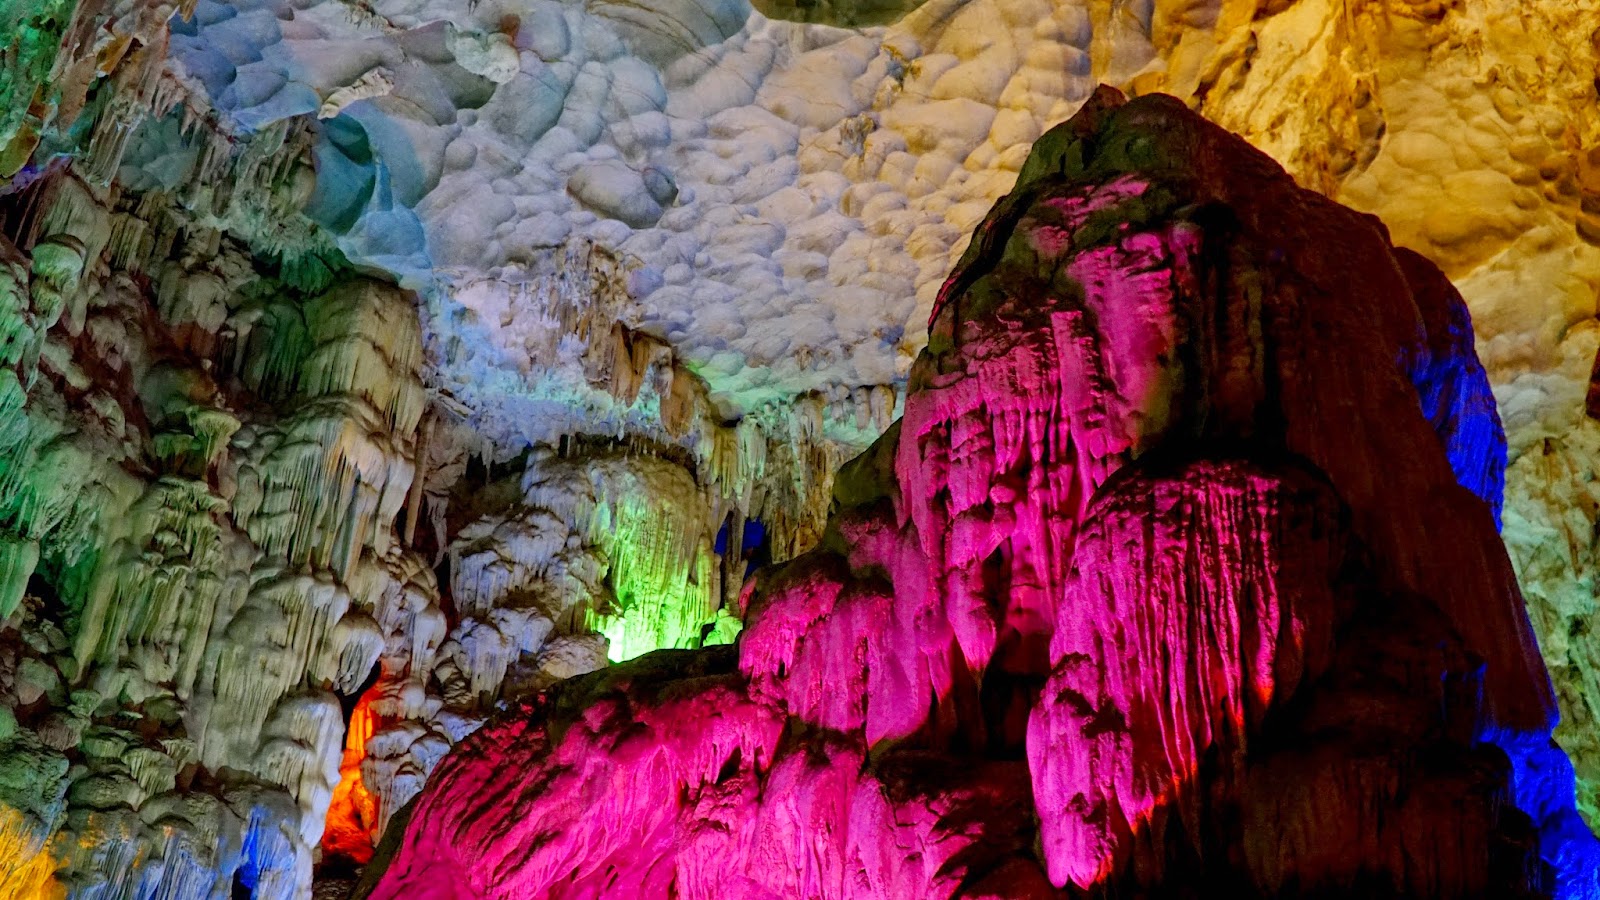 Beautiful stalactite and stalagmite formations in Thien Cung cave